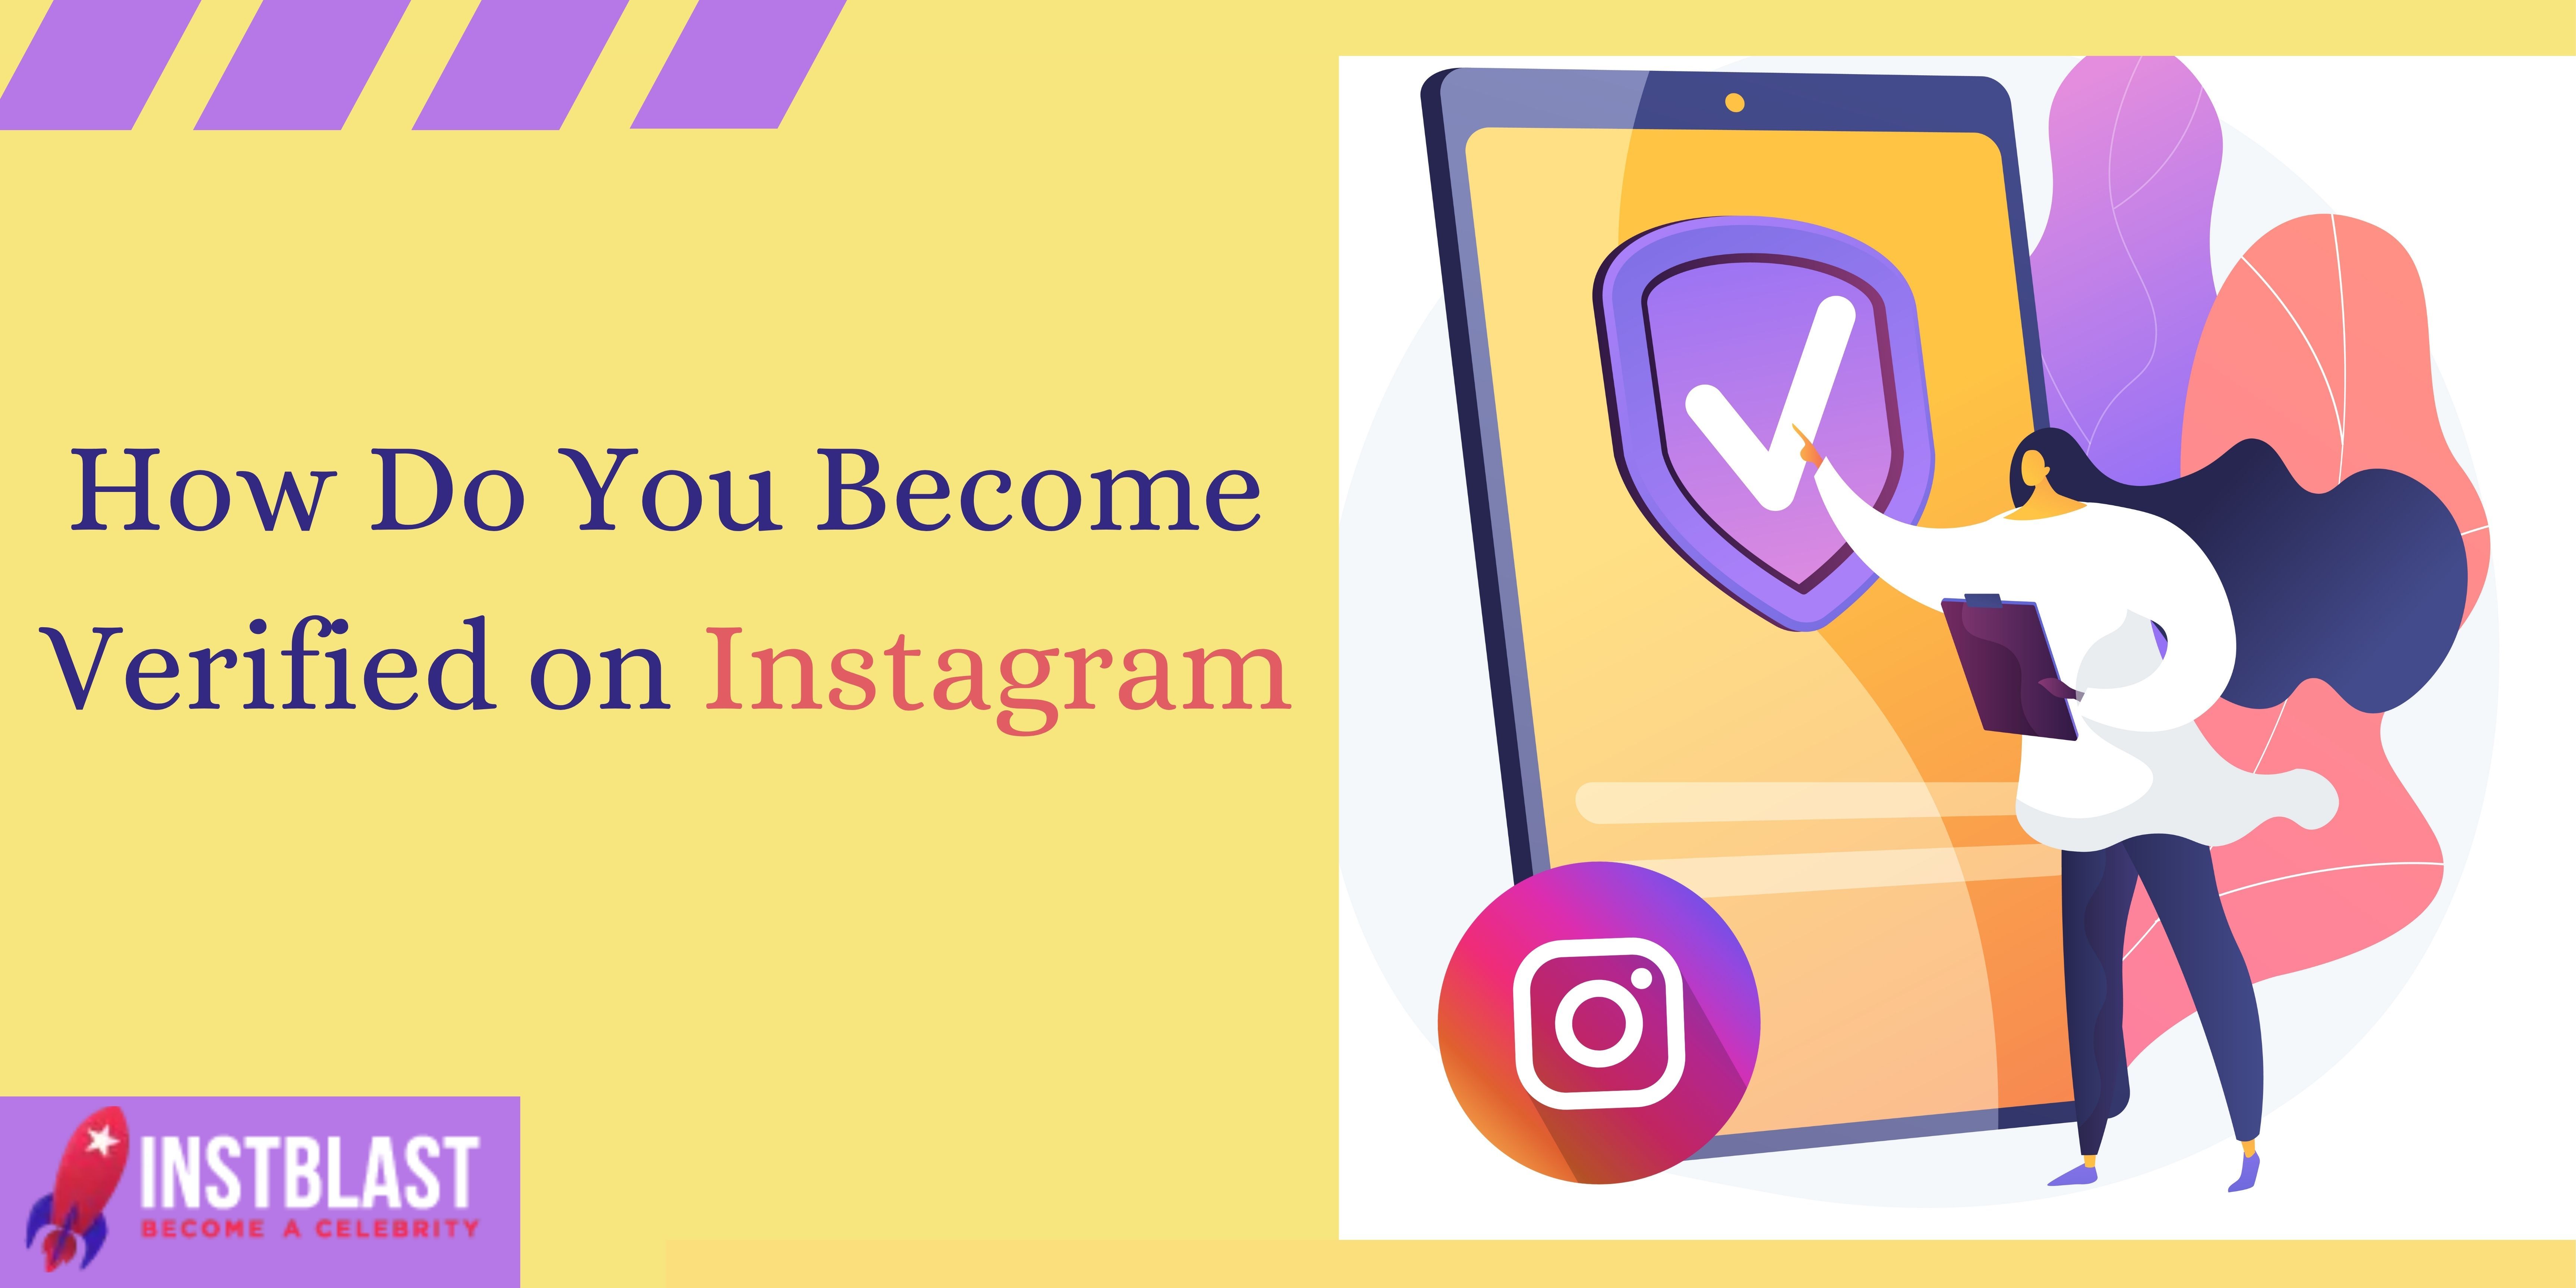 How Do You Become Verified on Instagram?